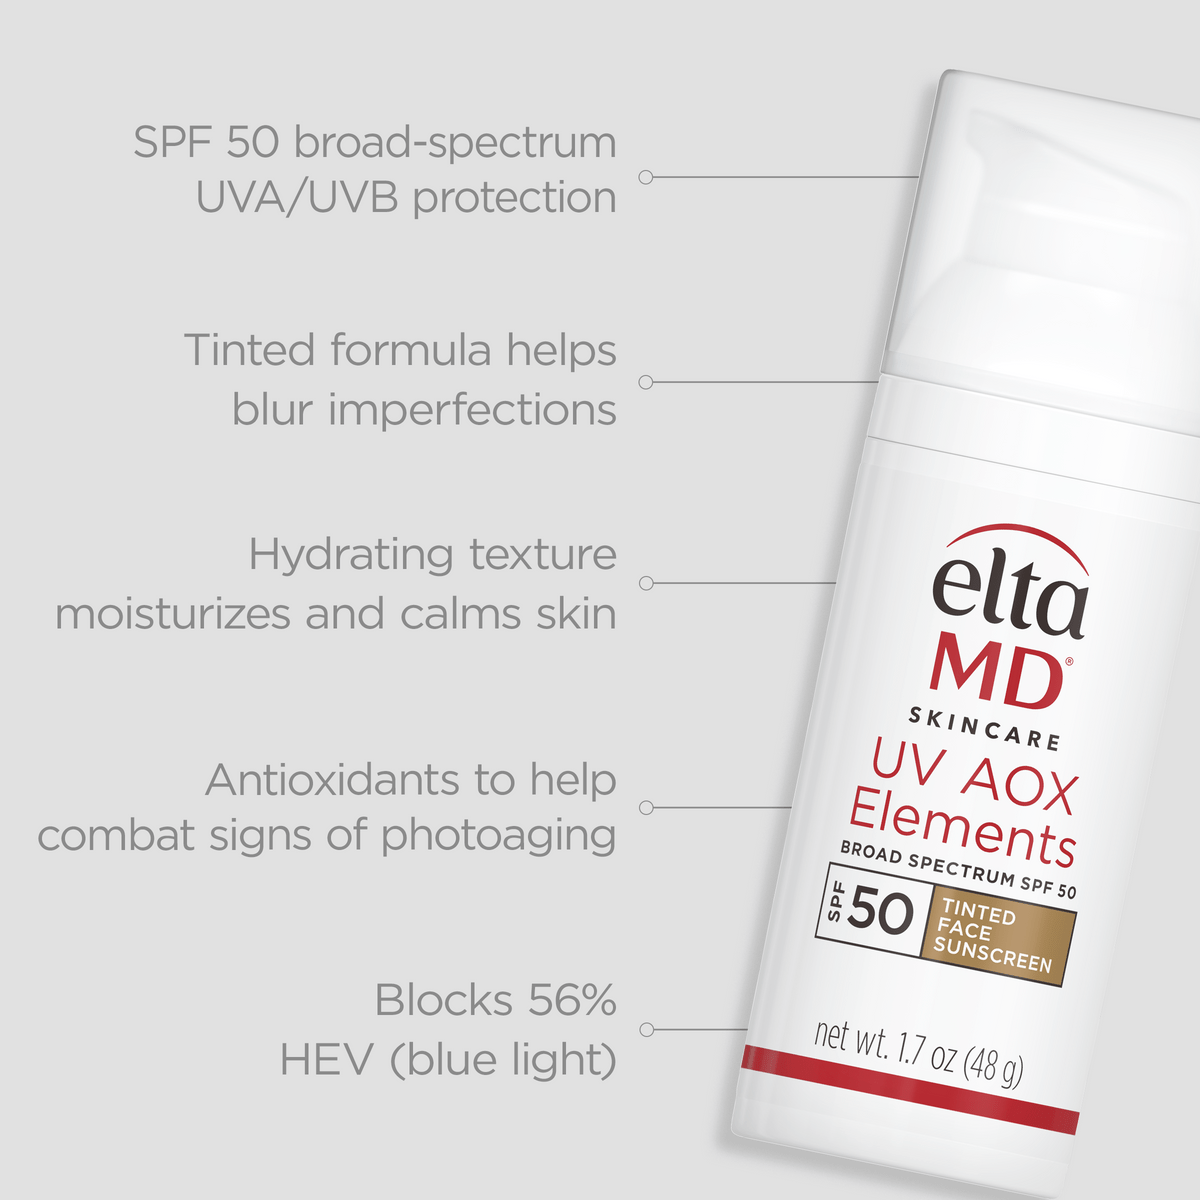 UV AOX Elements Tinted SPF 44 (formerly UV Elements) - The Look and Co